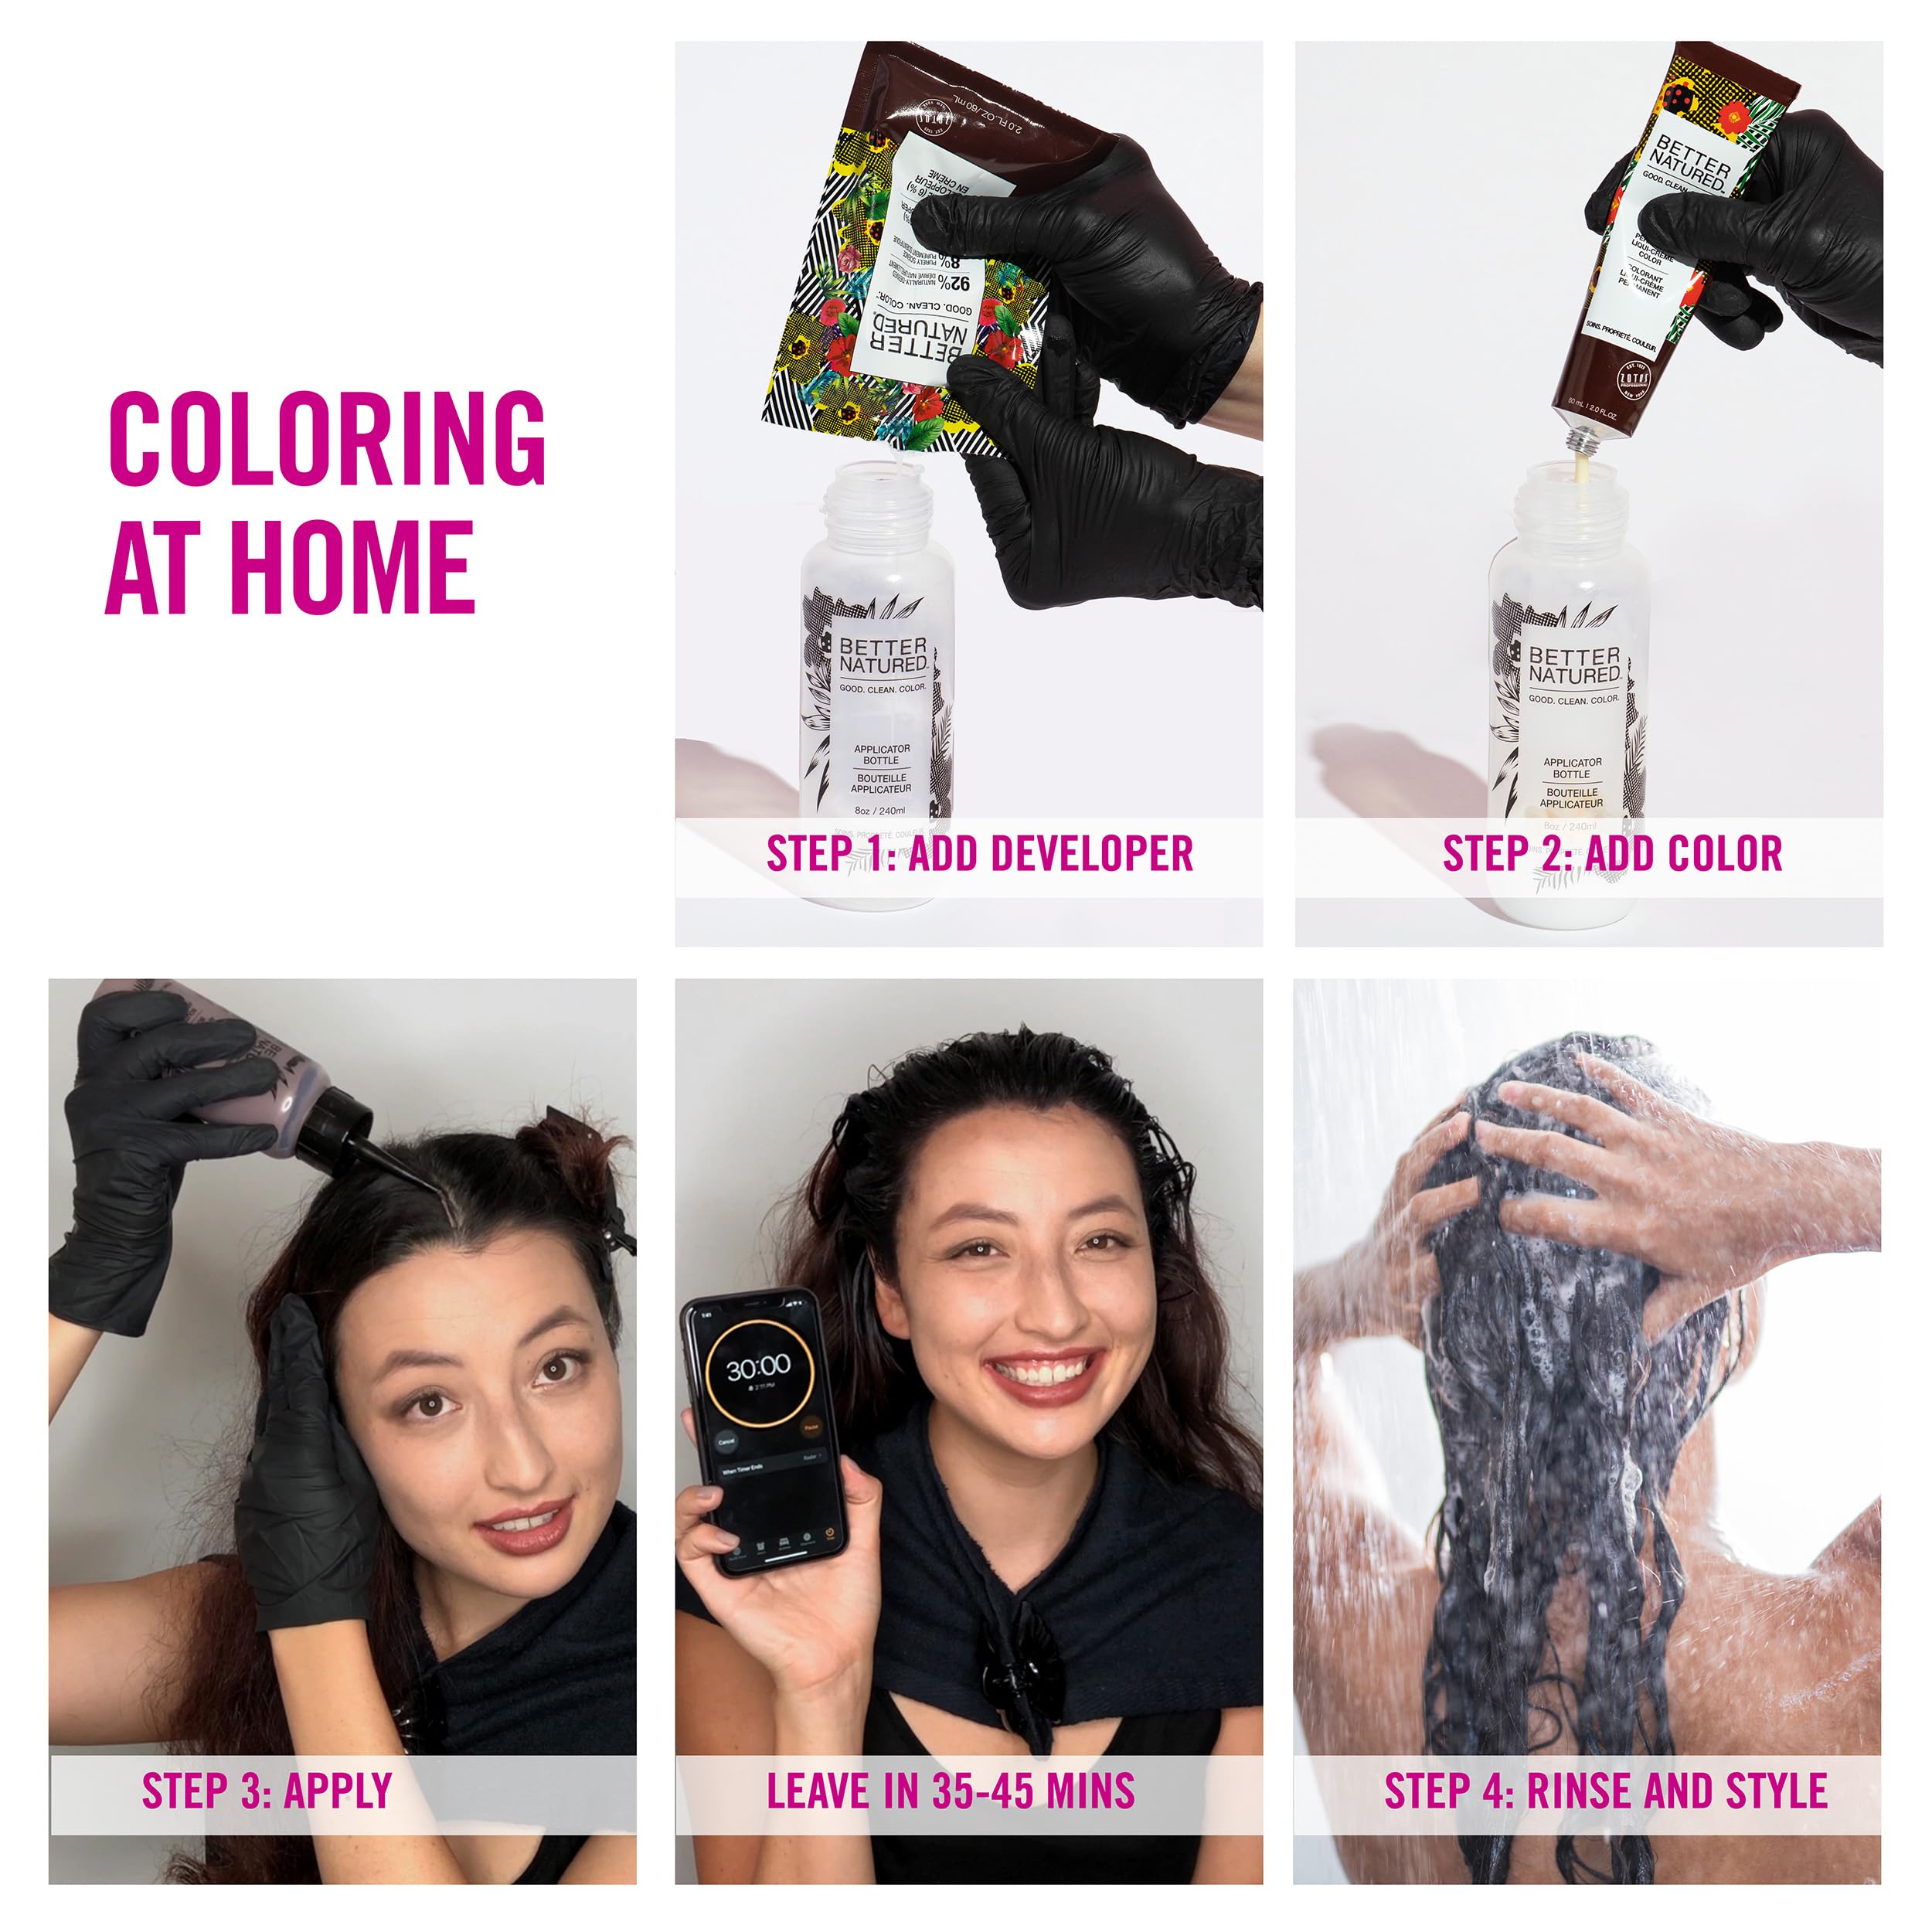 Better Natured 1N Black Permanent Hair Color Dye Kit (Color, Developer, Barrier Cream, Gloves, Cleaning Wipe, Shampoo and Conditioner) Radiant Color that Lasts up to 8 Weeks